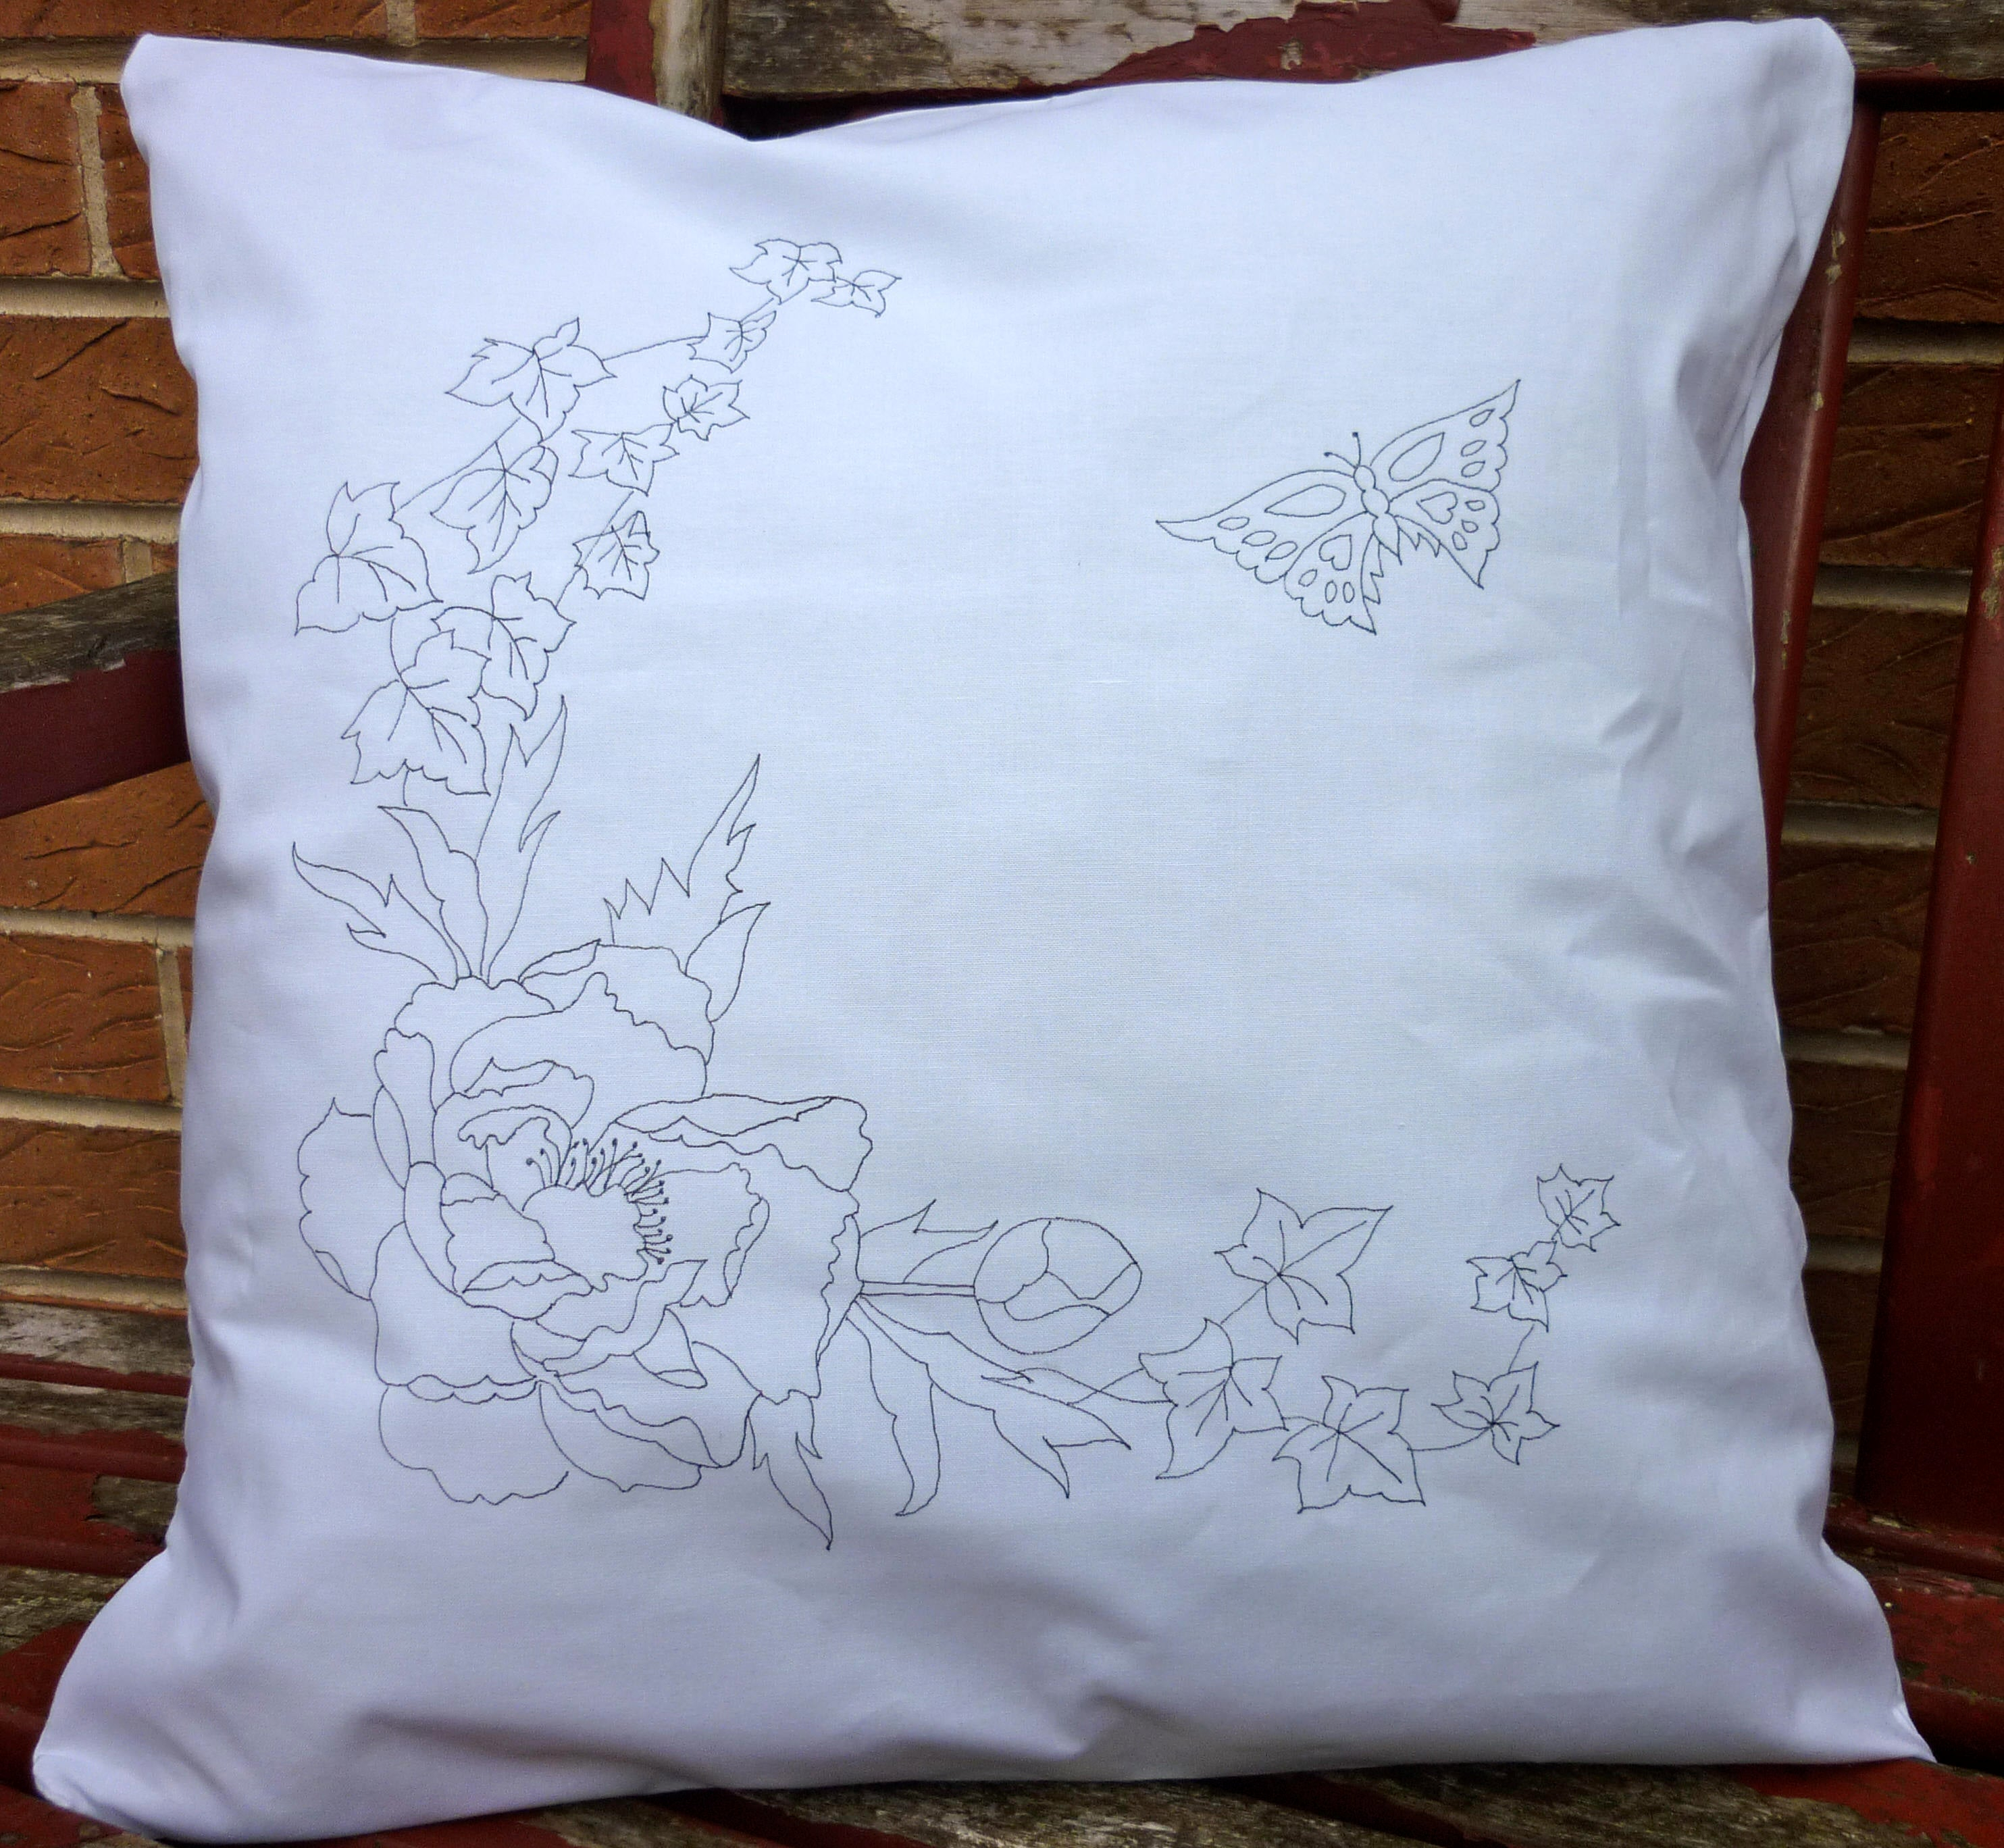 Cushion Cover Embroidery Patterns Unique Embroidery Design On A Cushion To Embroider With A Flowers Butterfly Embroidery Pattern